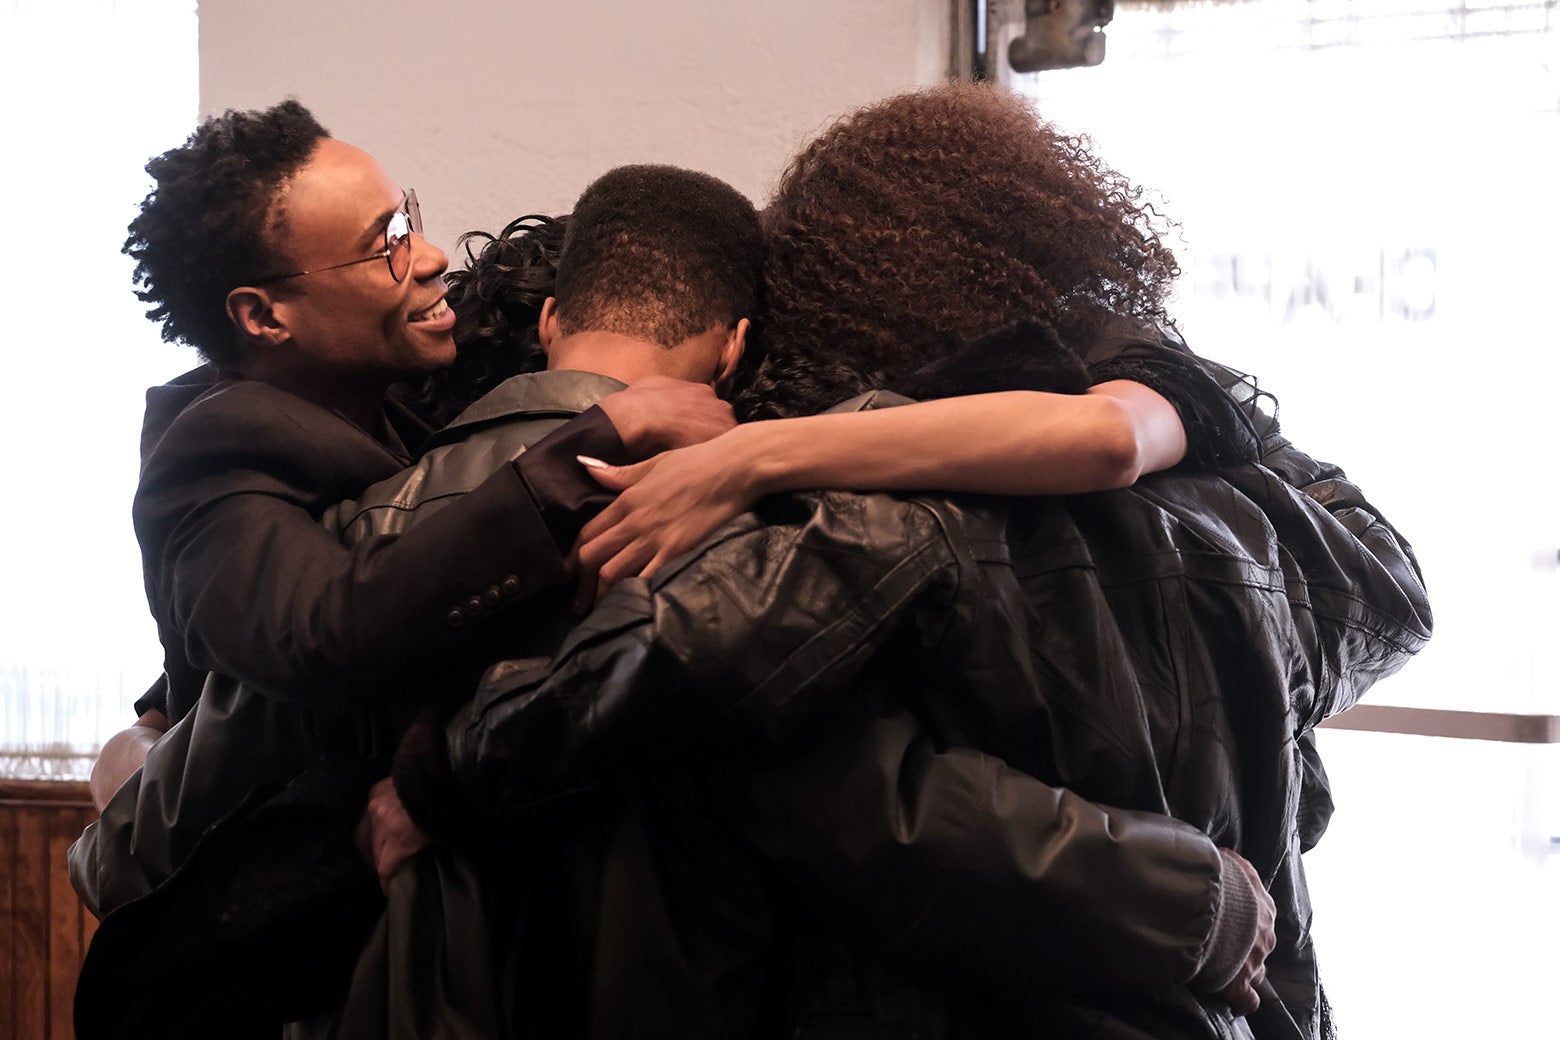 The characters engage in a group hug.